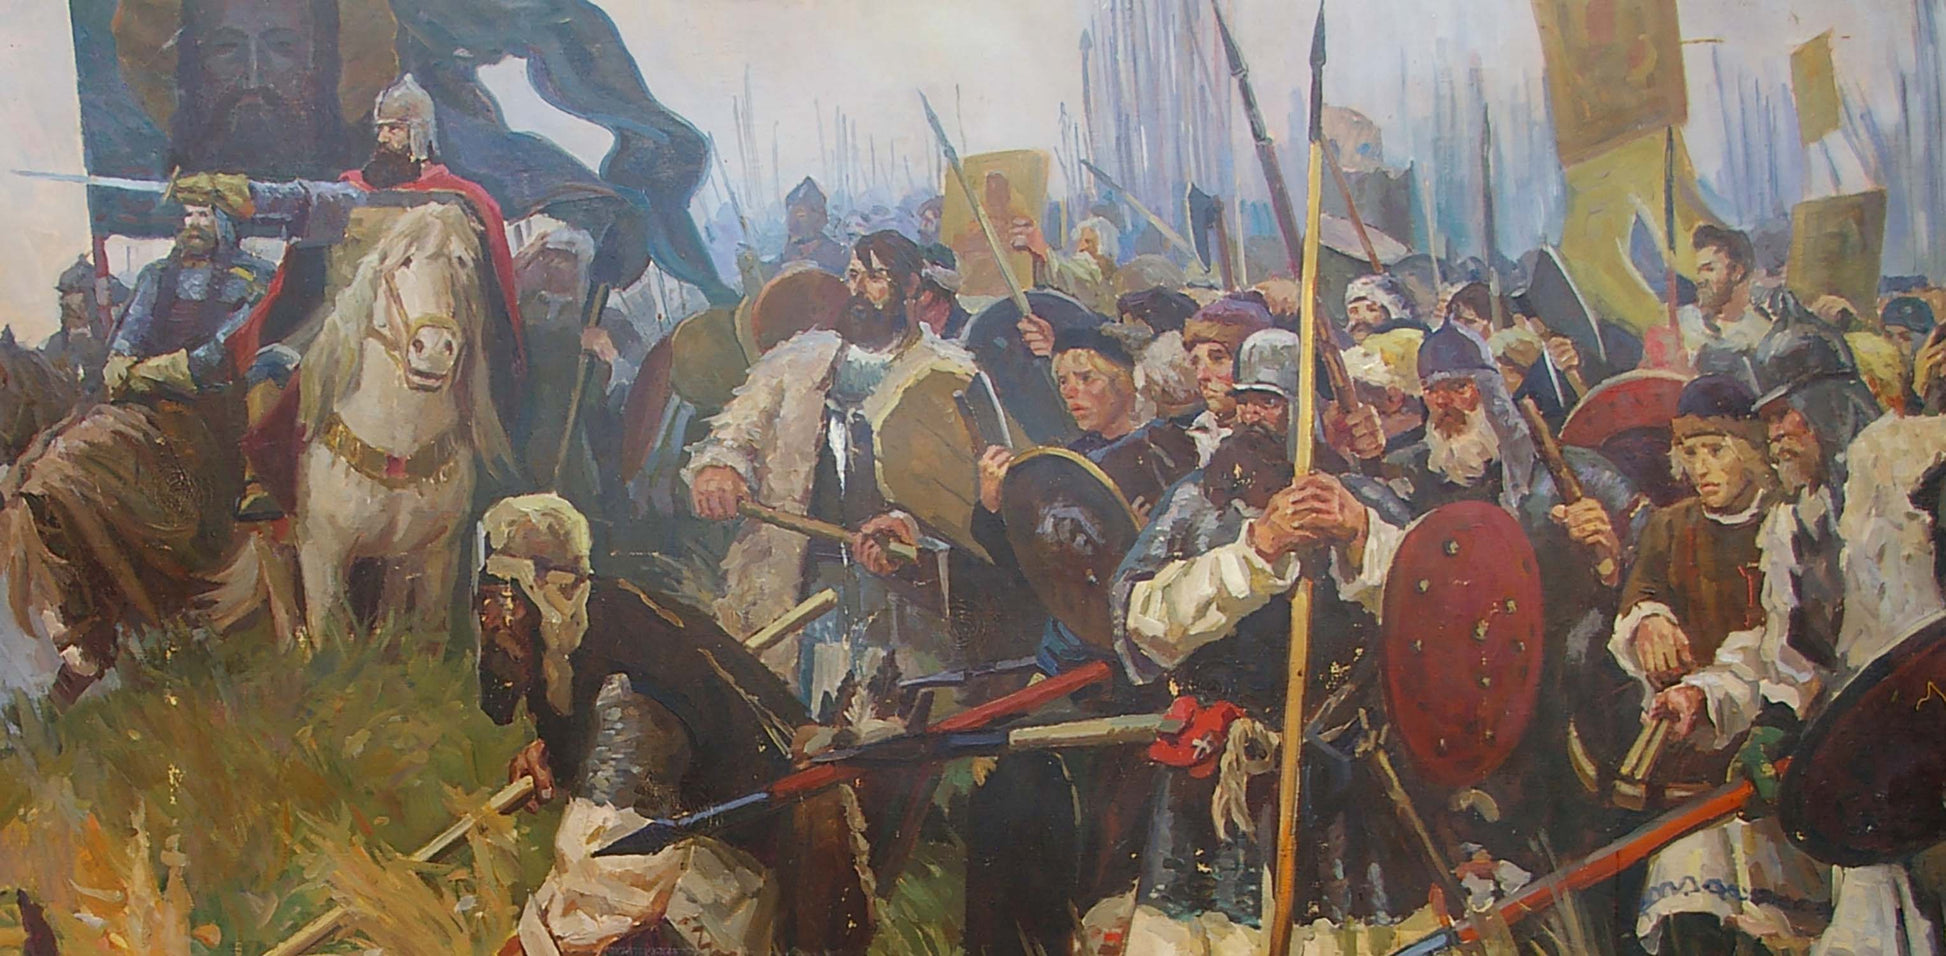 Oil composition The Battle of Kulikovo Field by an unknown painter